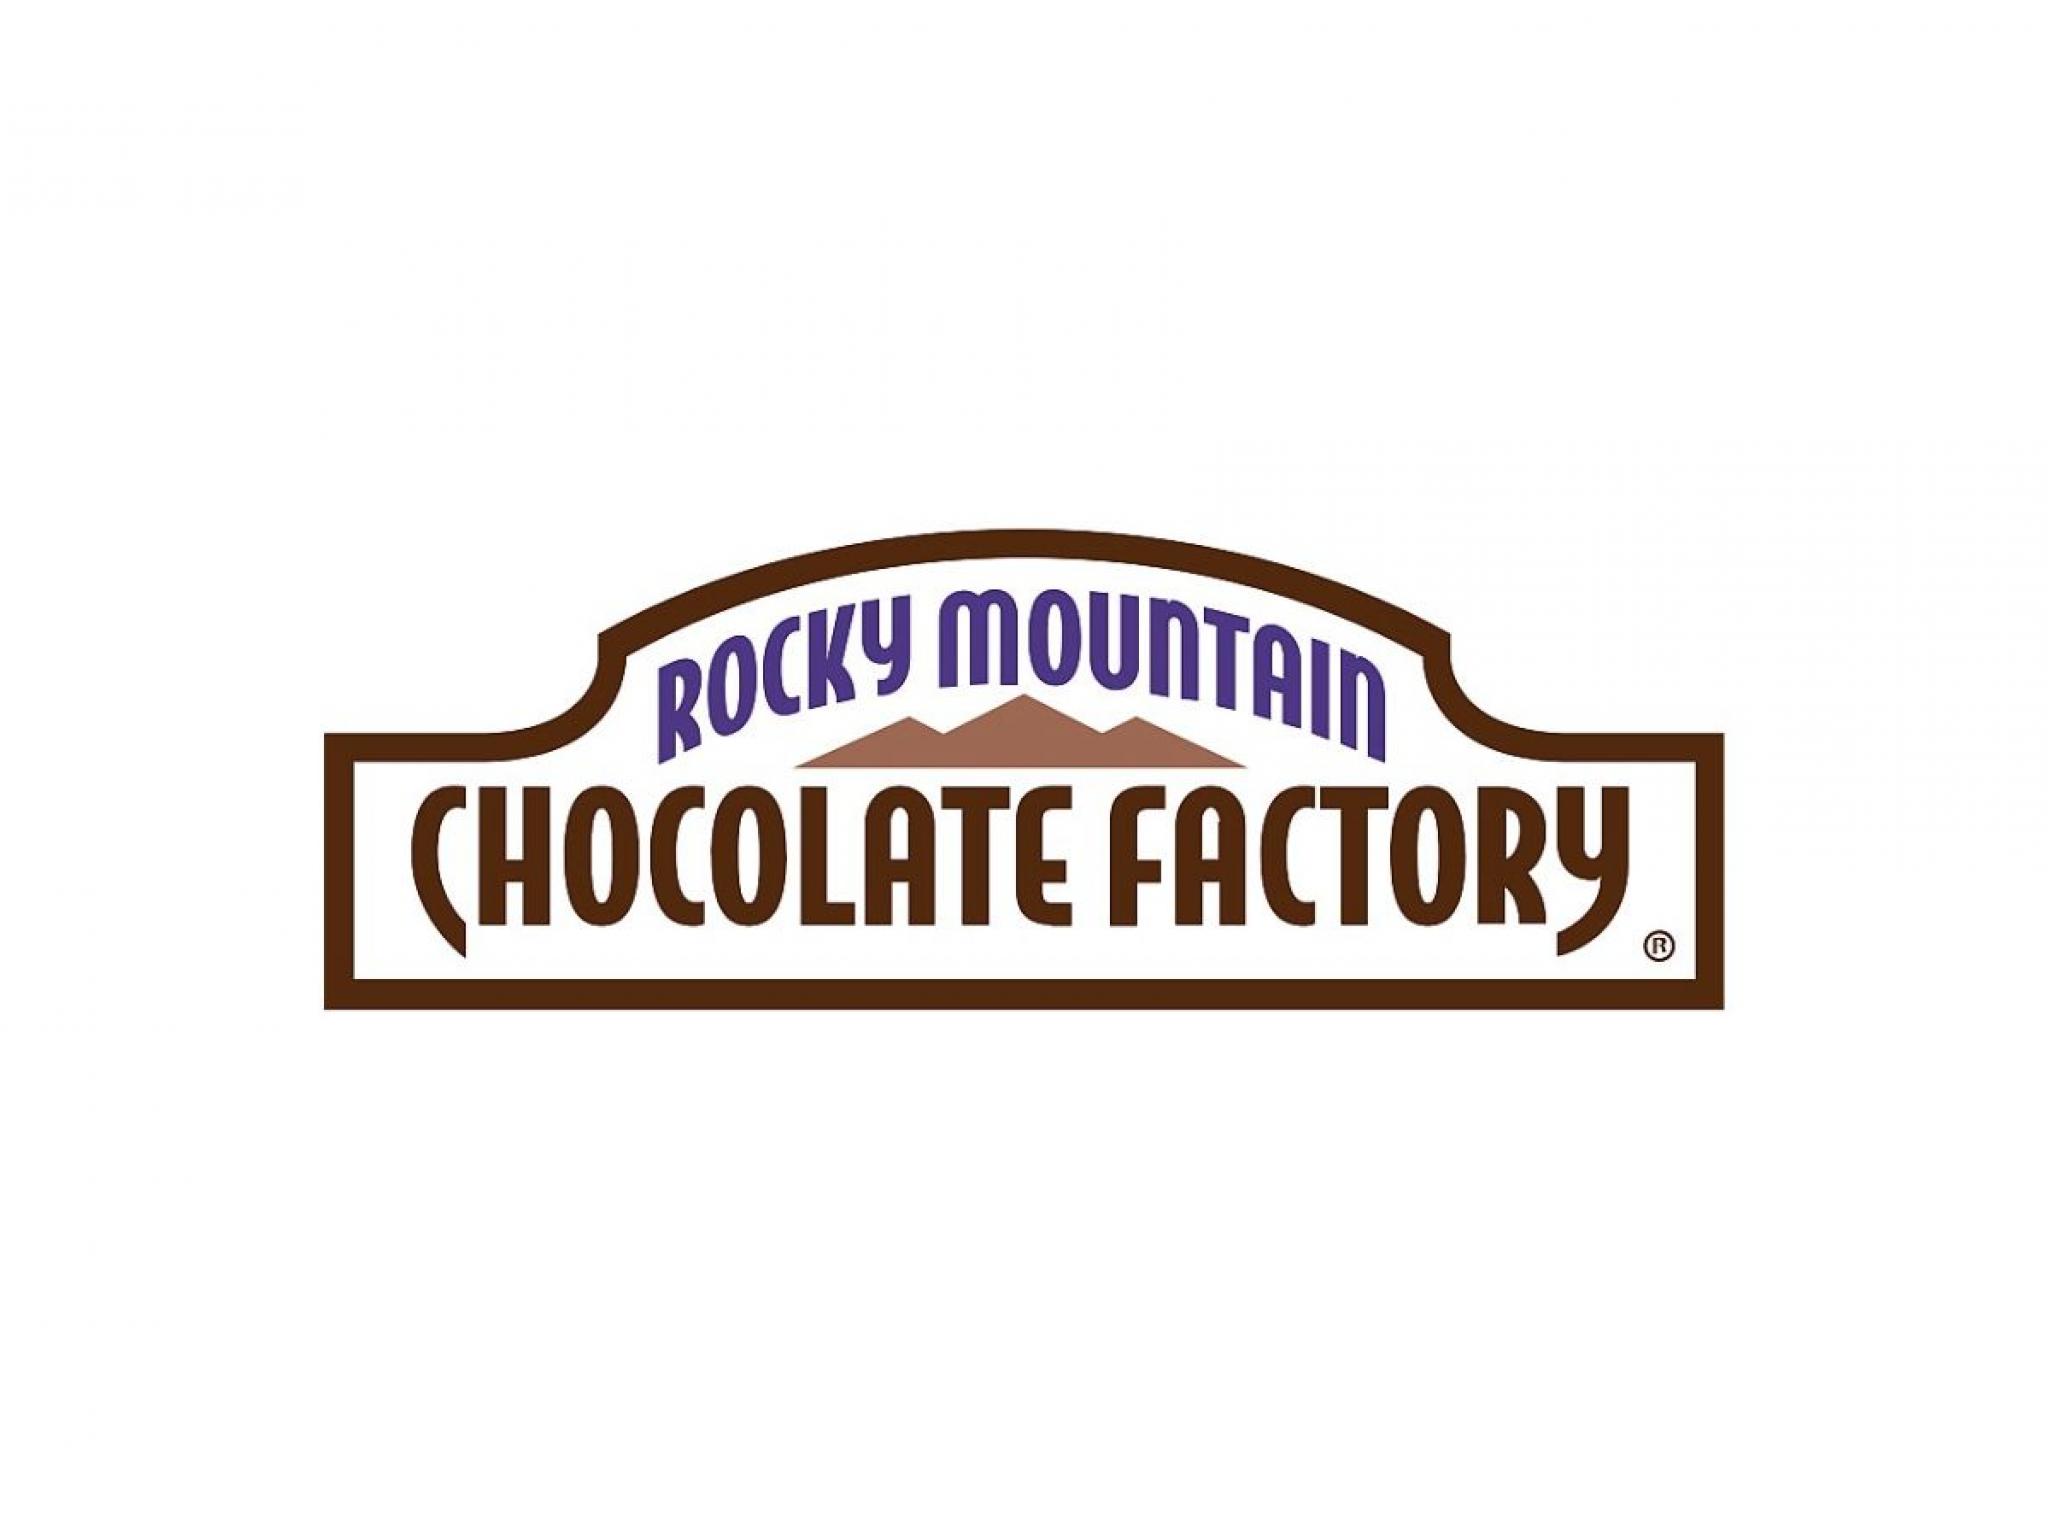  insiders-buying-rocky-mountain-chocolate-factory-and-3-other-penny-stocks 